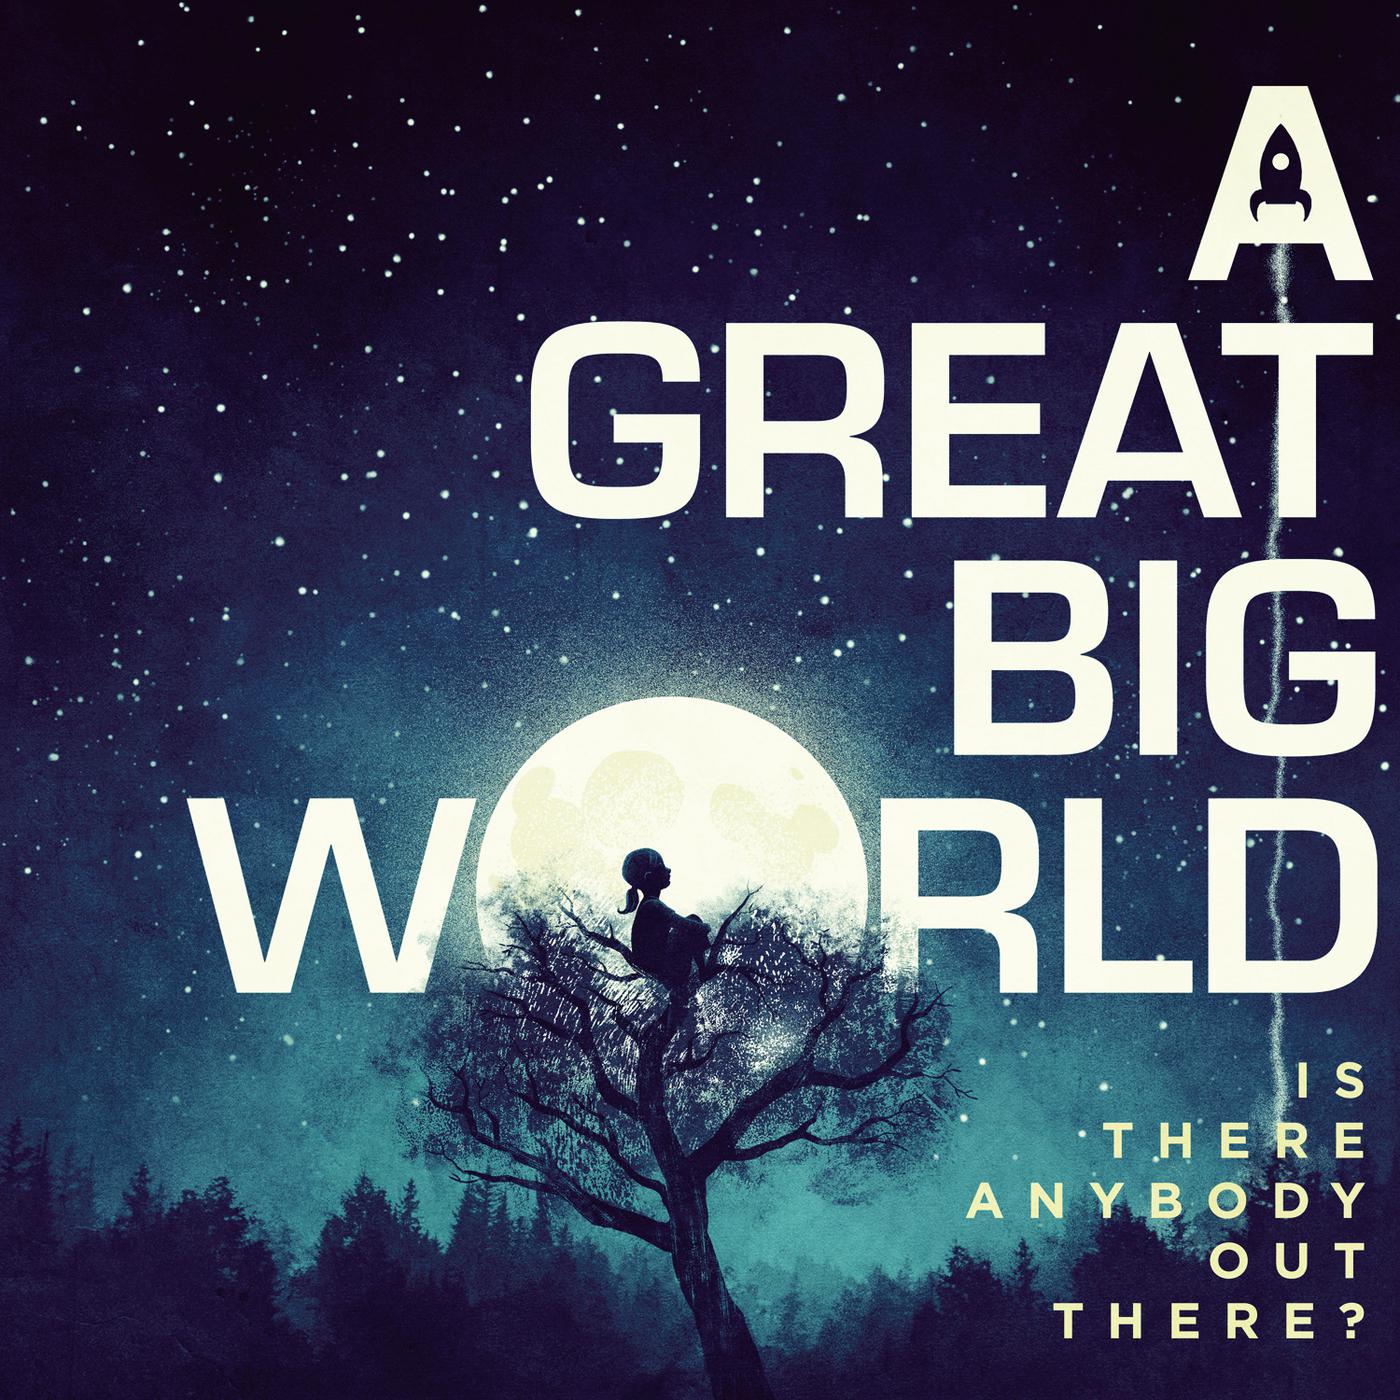 Say Something歌词 歌手A Great Big World-专辑Is There Anybody Out There?-单曲《Say Something》LRC歌词下载